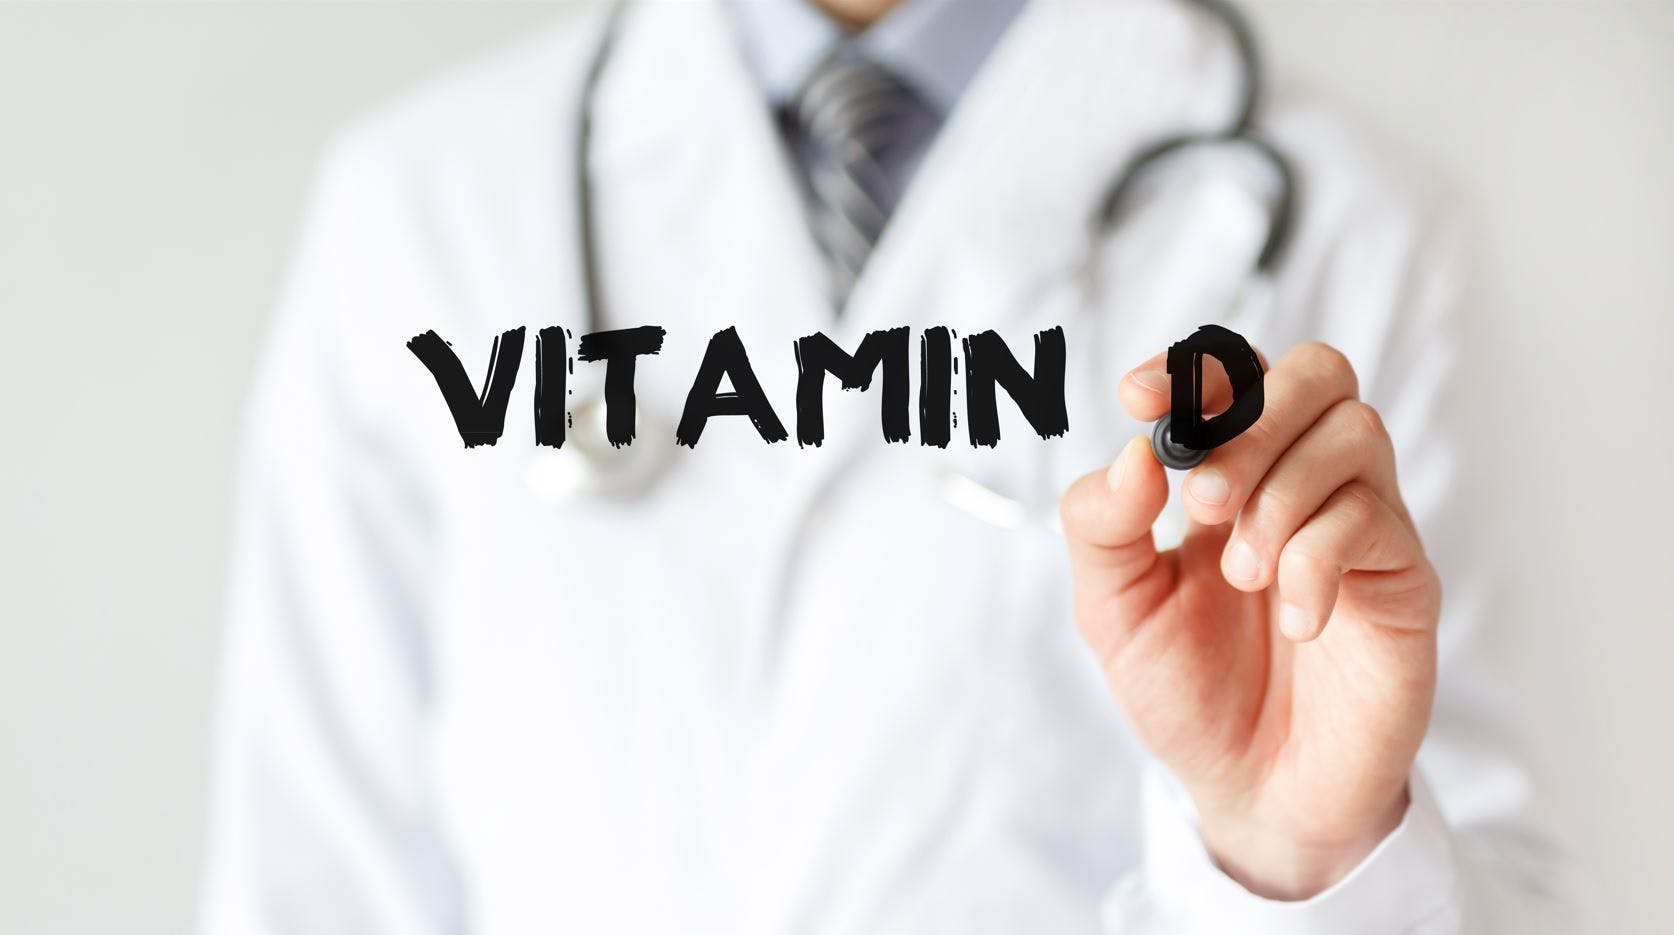 Endocrine Society Releases New Clinical Guideline on Vitamin D Supplementation for Prevention of Disease